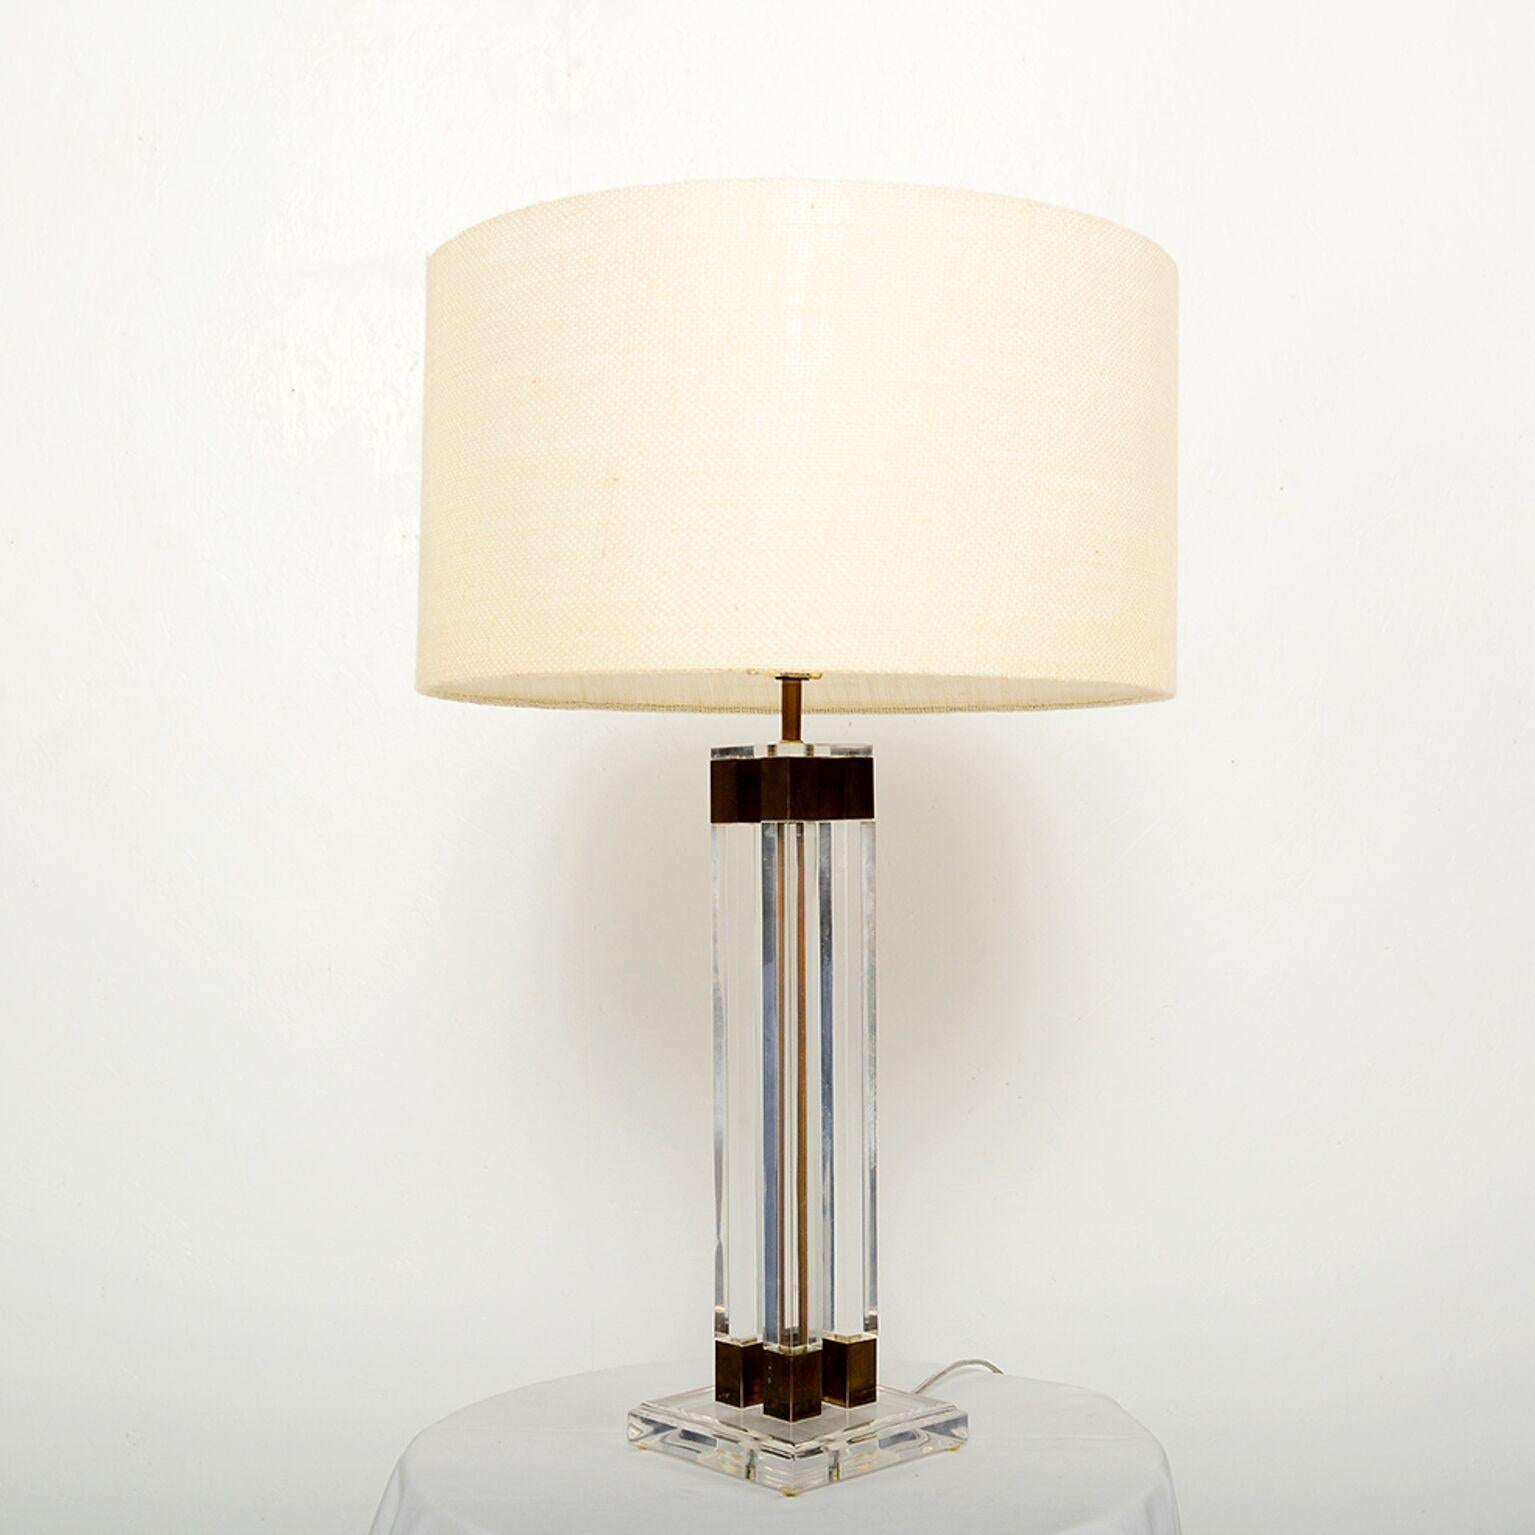 Mexican Lucite and Brass Table Lamp Modern Regency Style of Charles Hollis Jones 1970s